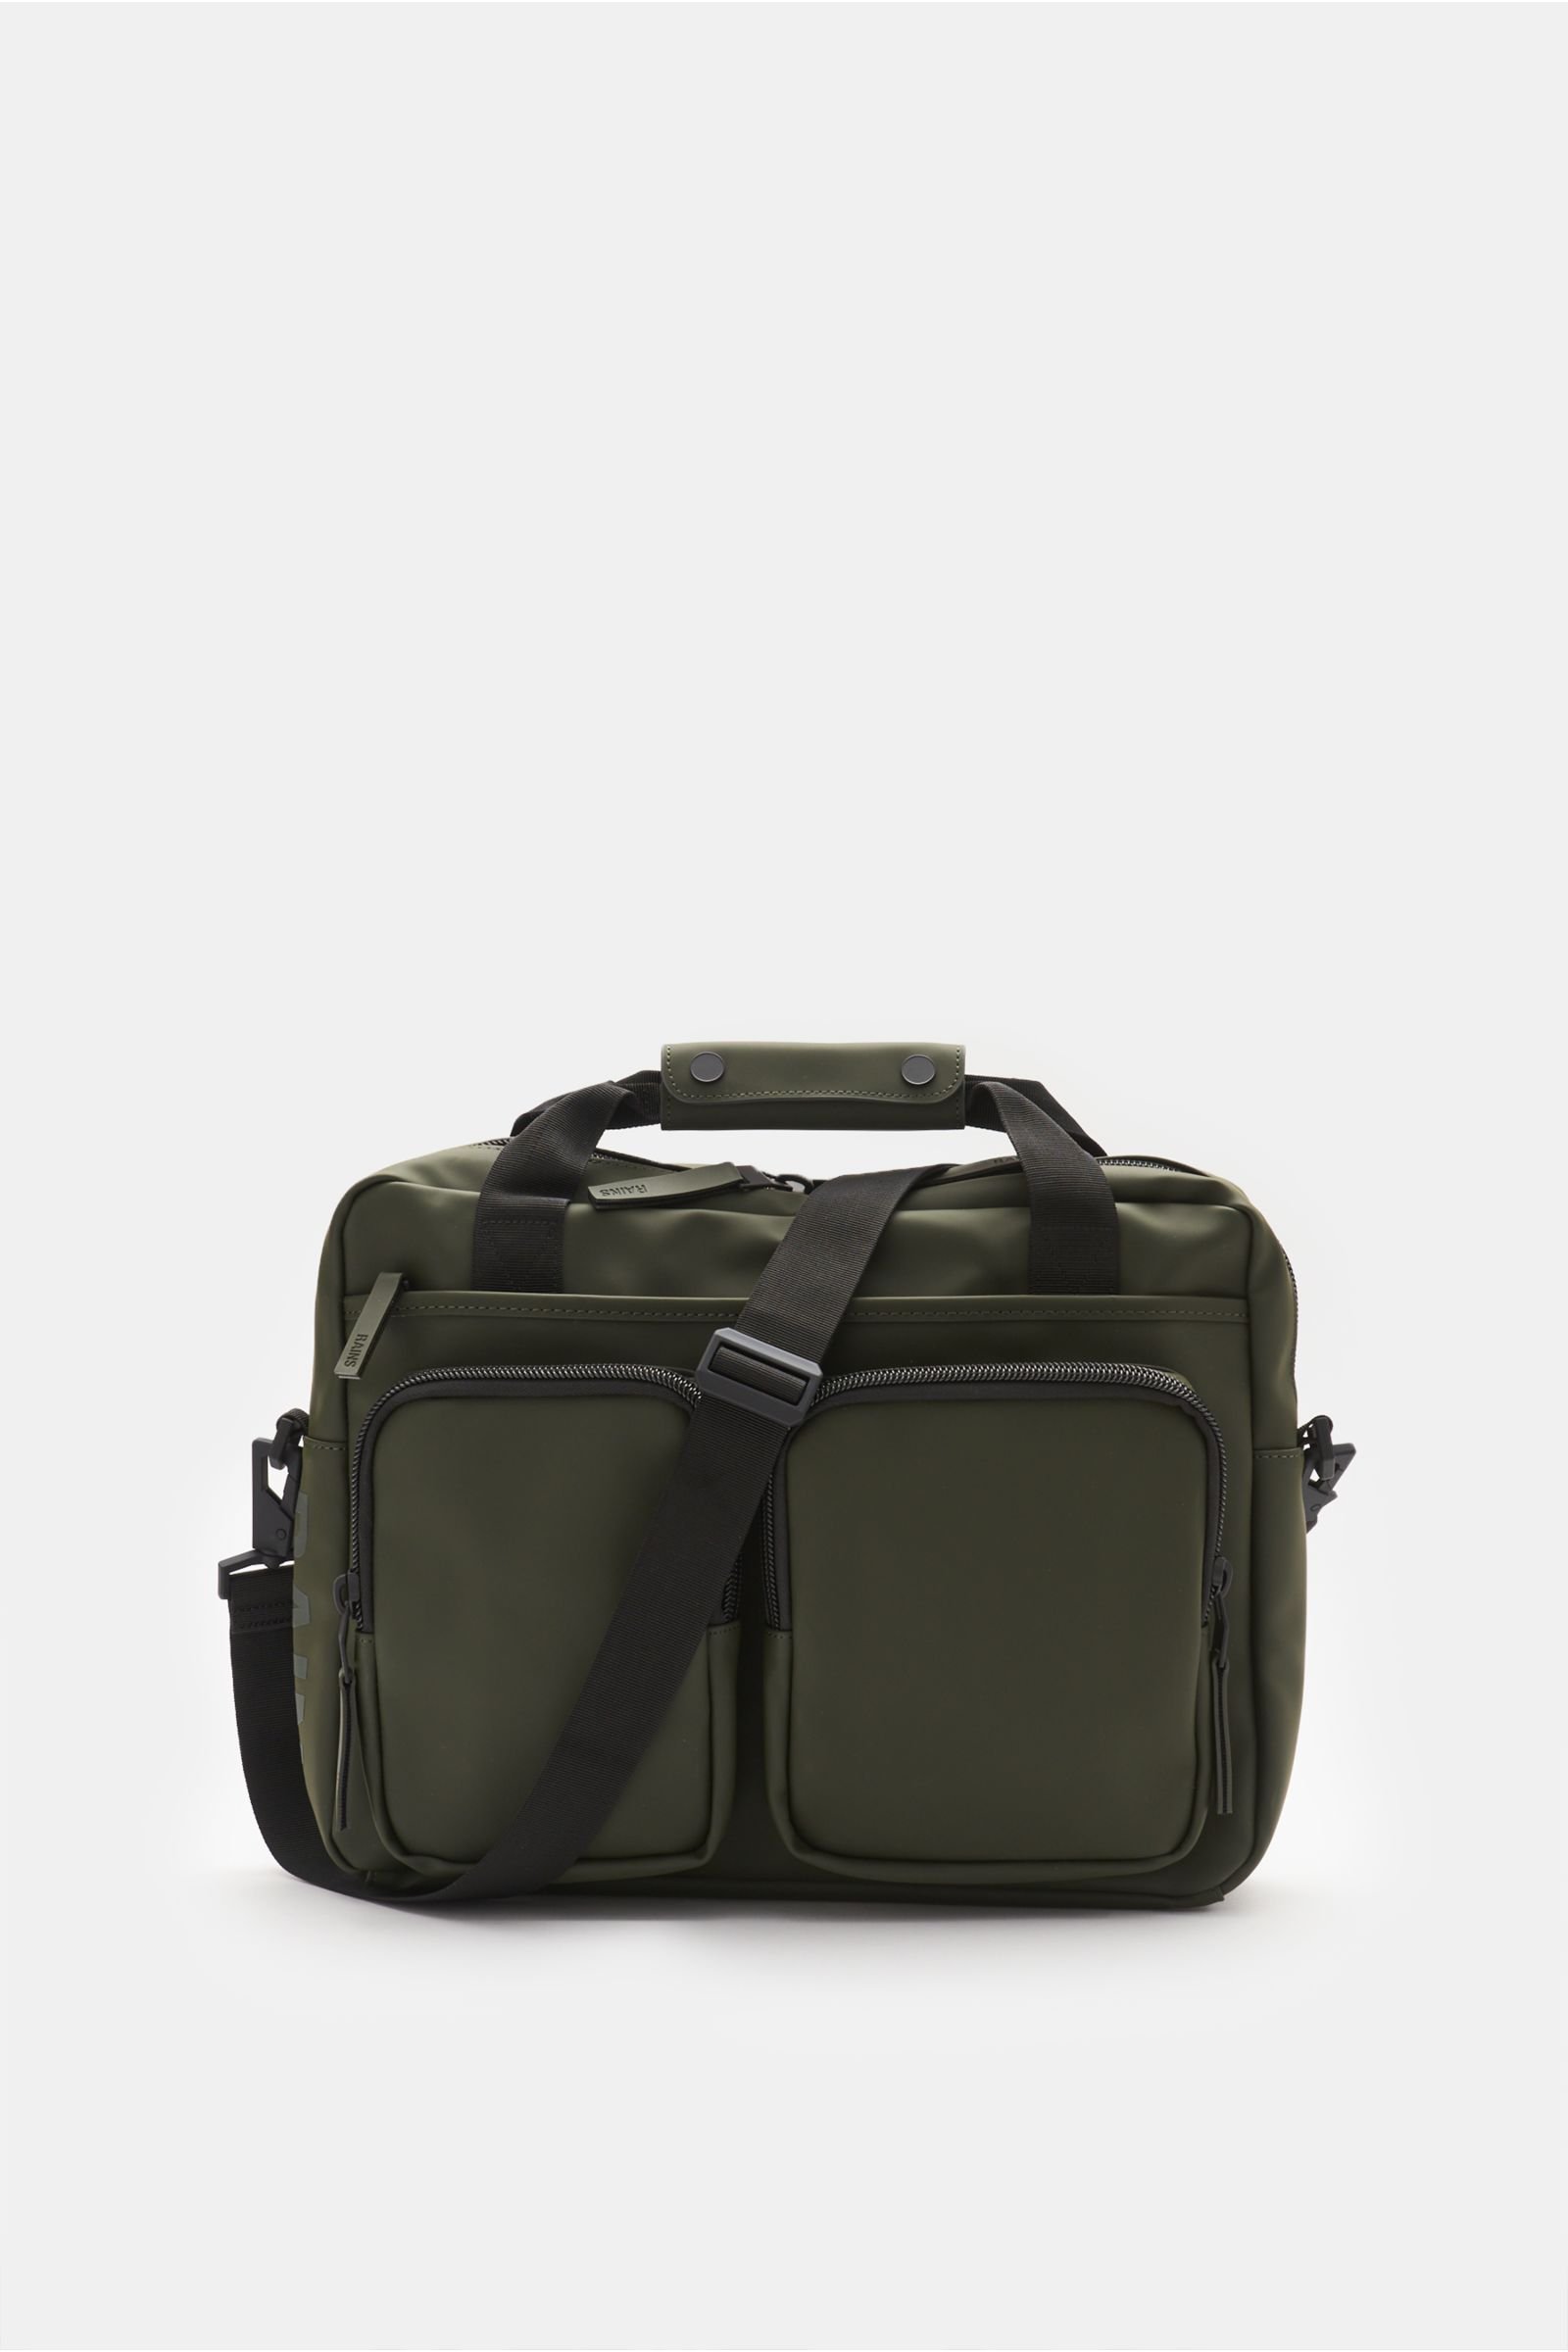 Briefcase 'Texel Tech Bag' olive